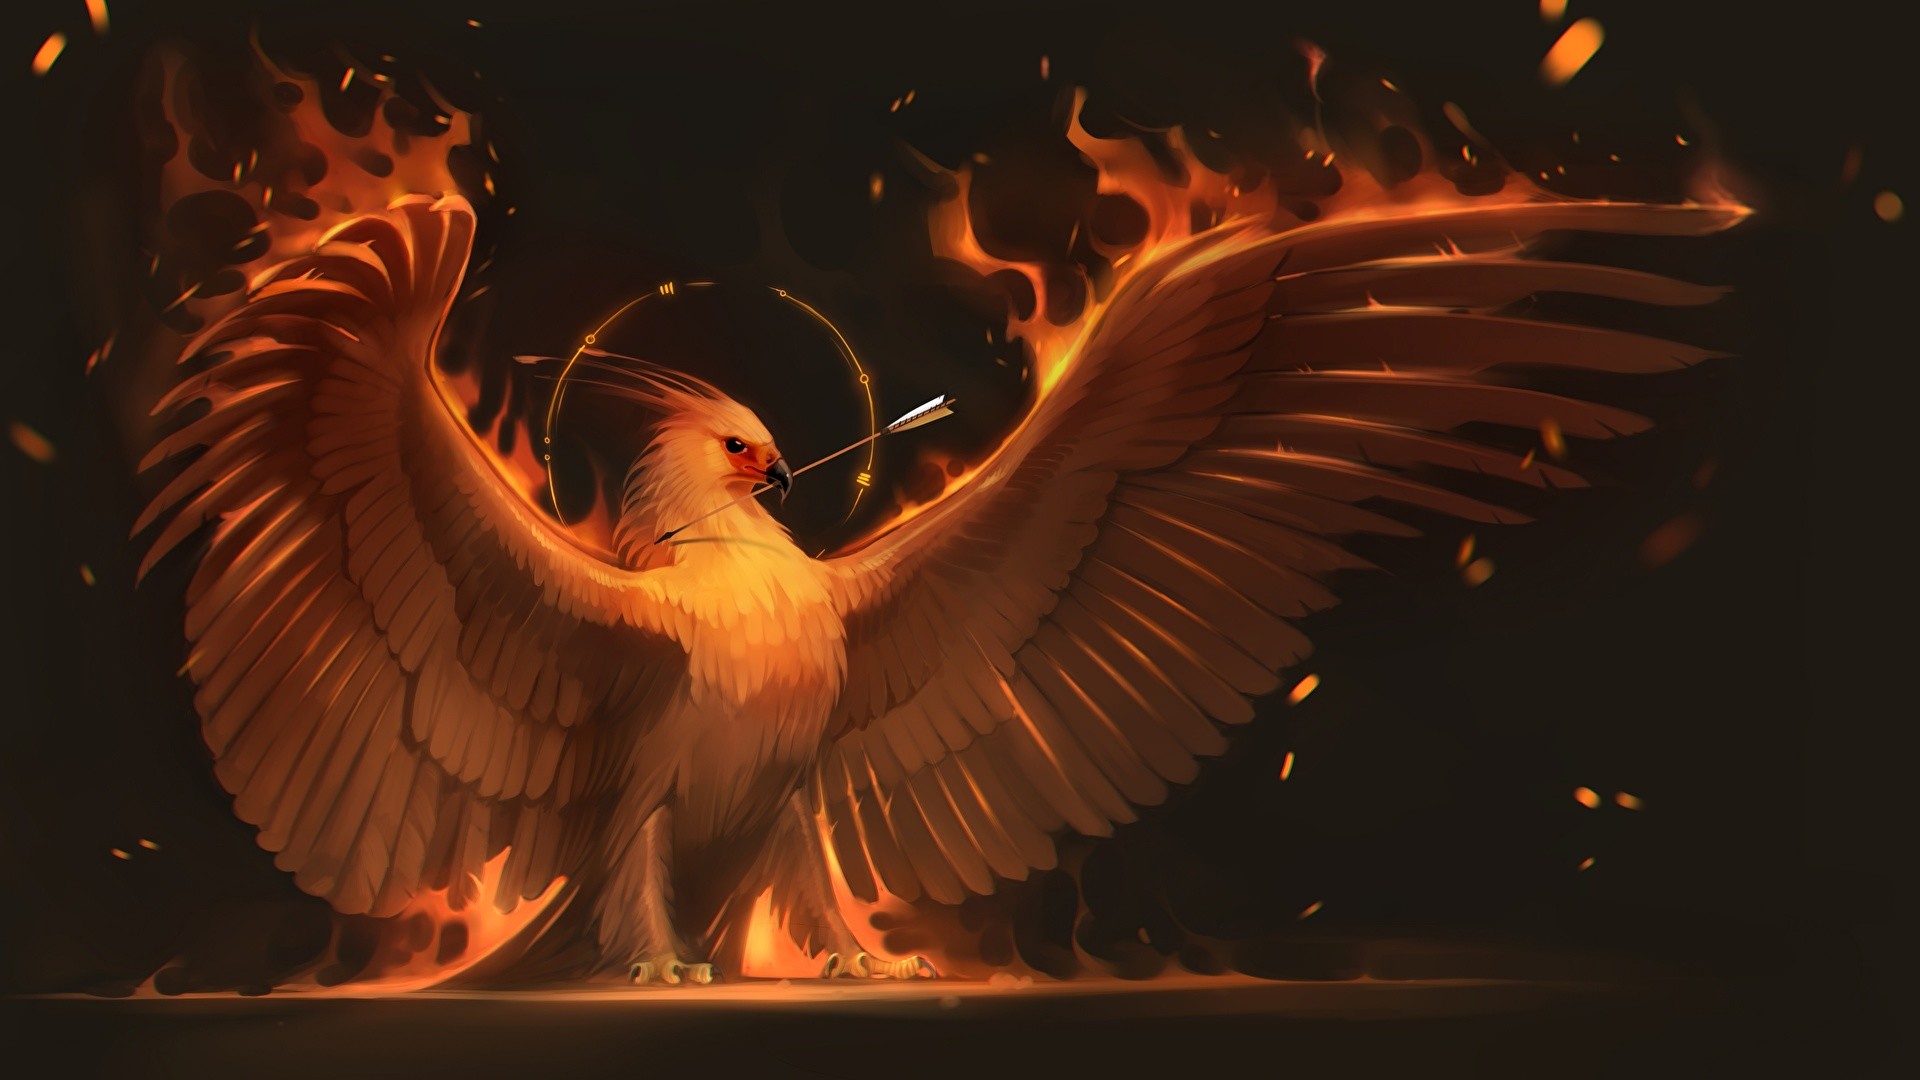 1920x1080 Wallpapers Birds Phoenix mythology Wings Fantasy Fire Magical animals   Flame